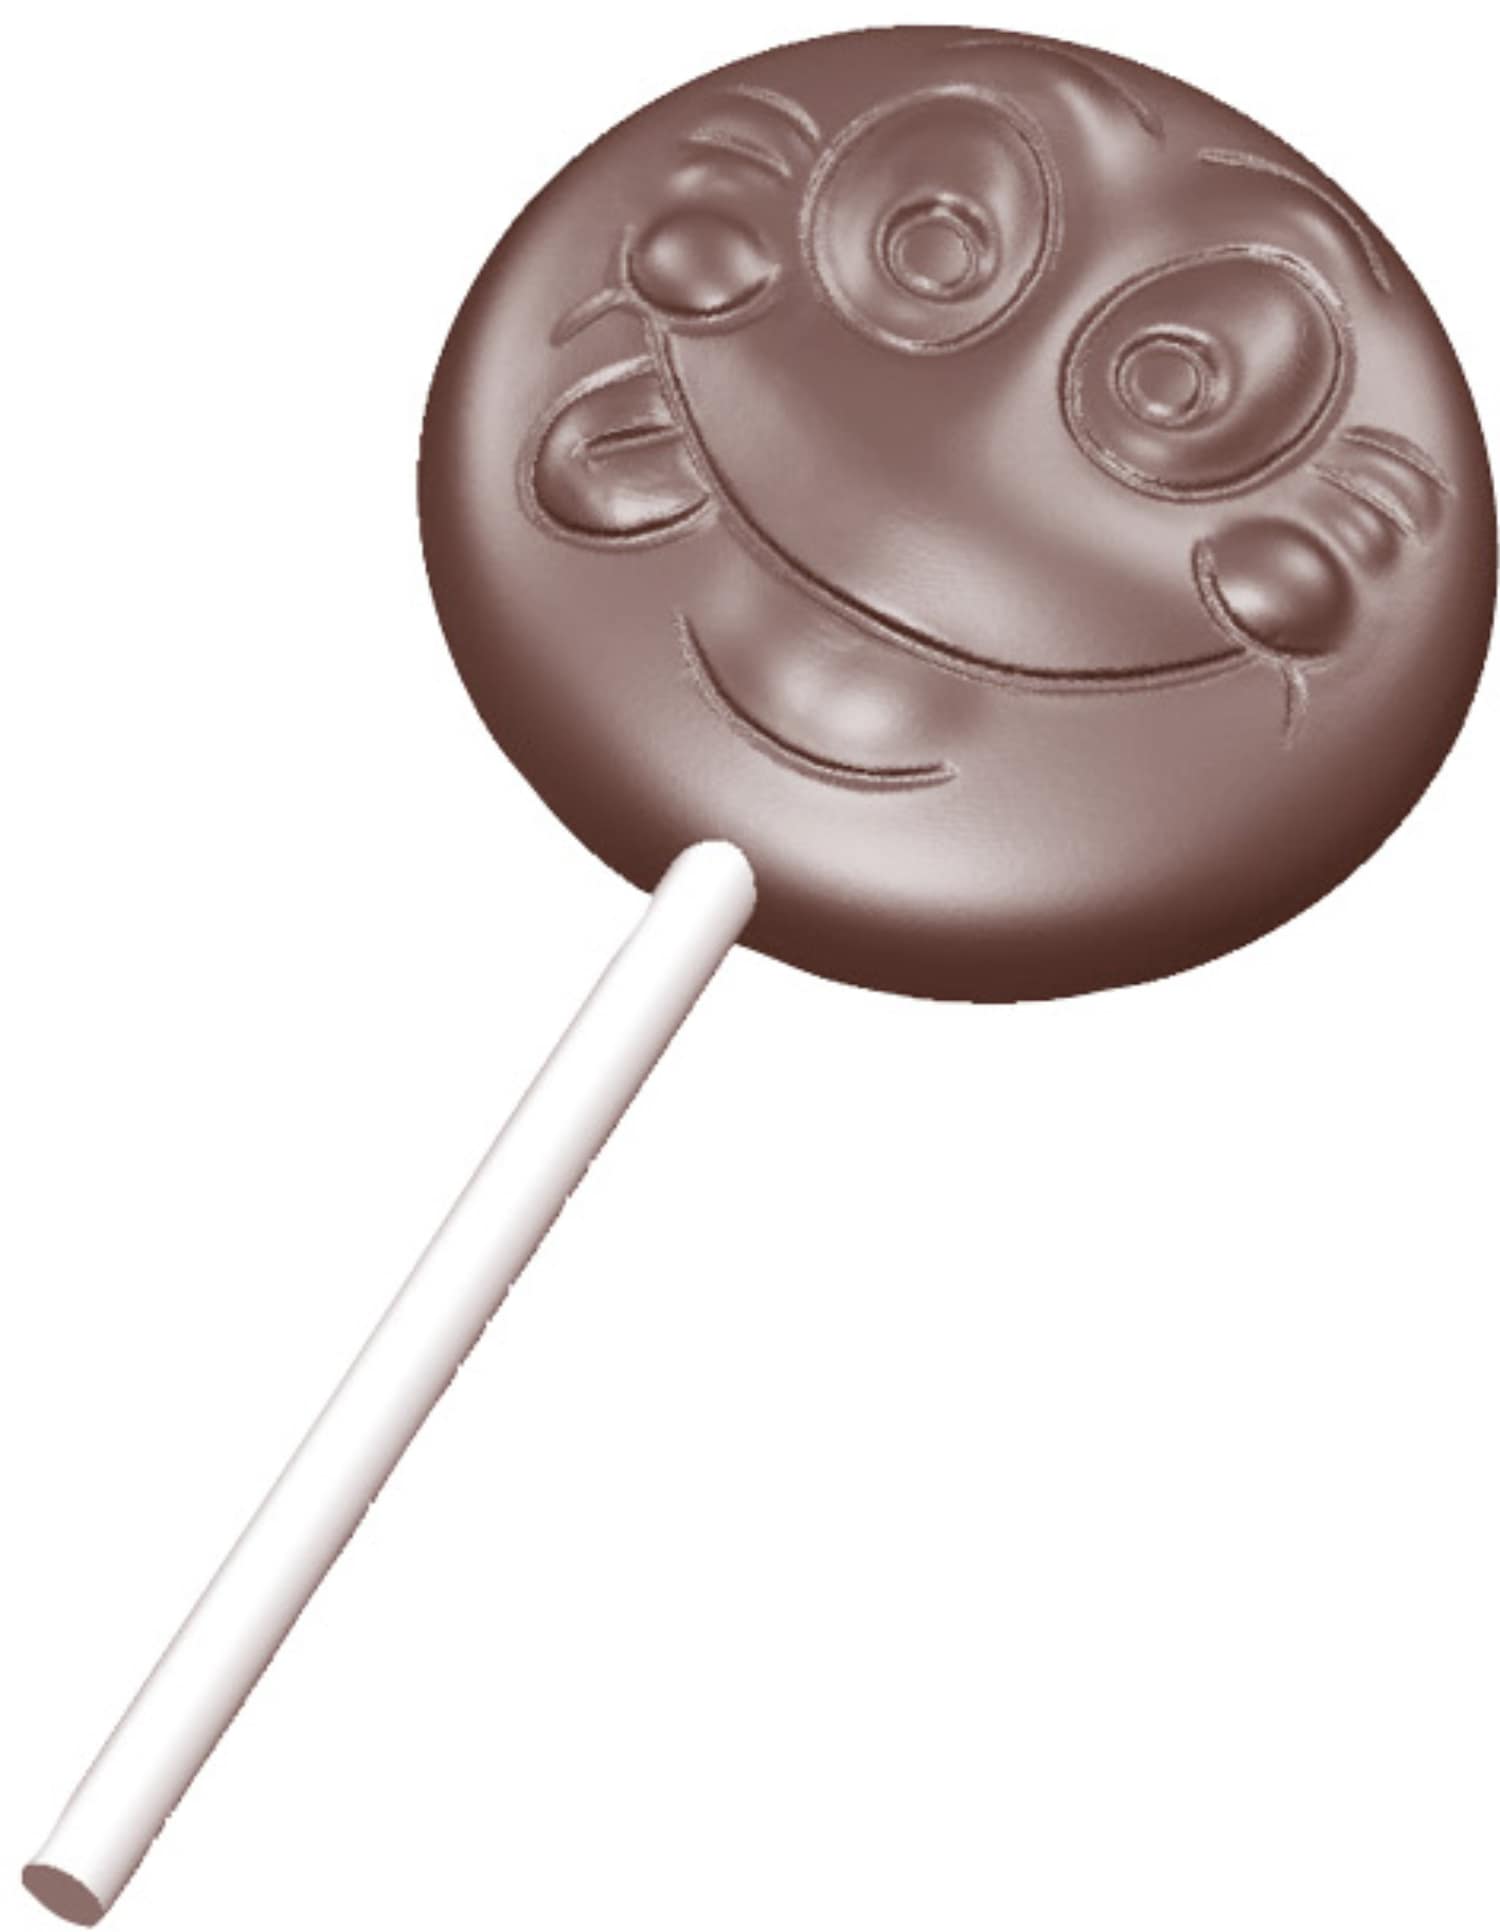 Chocolate mould "Lollies" 421623 421623